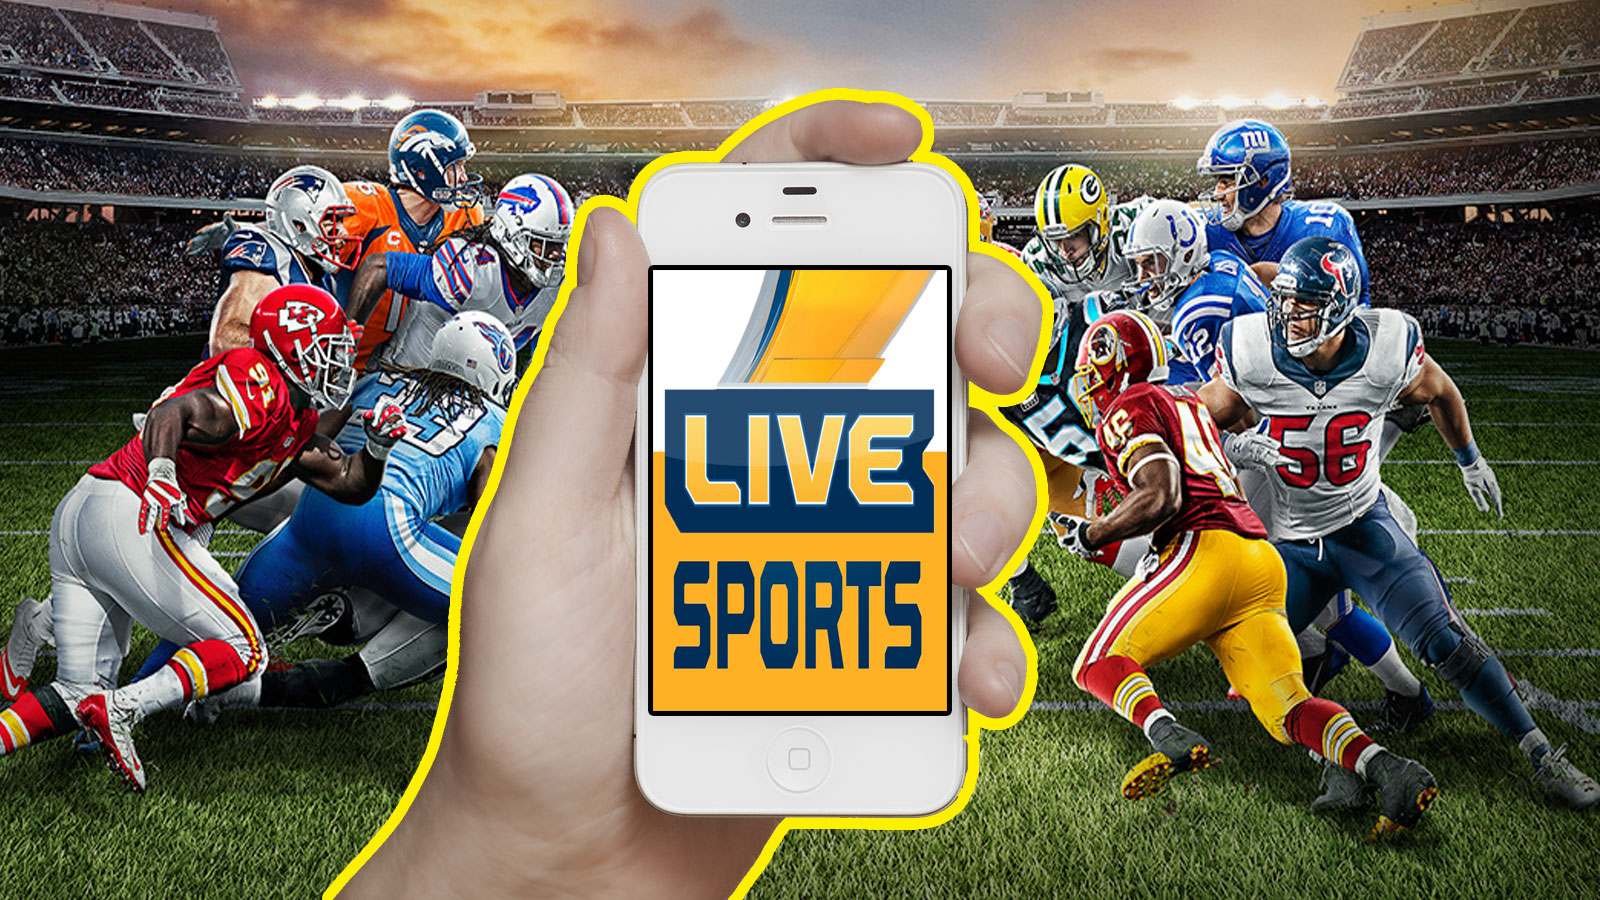 Free Sports Live Streaming